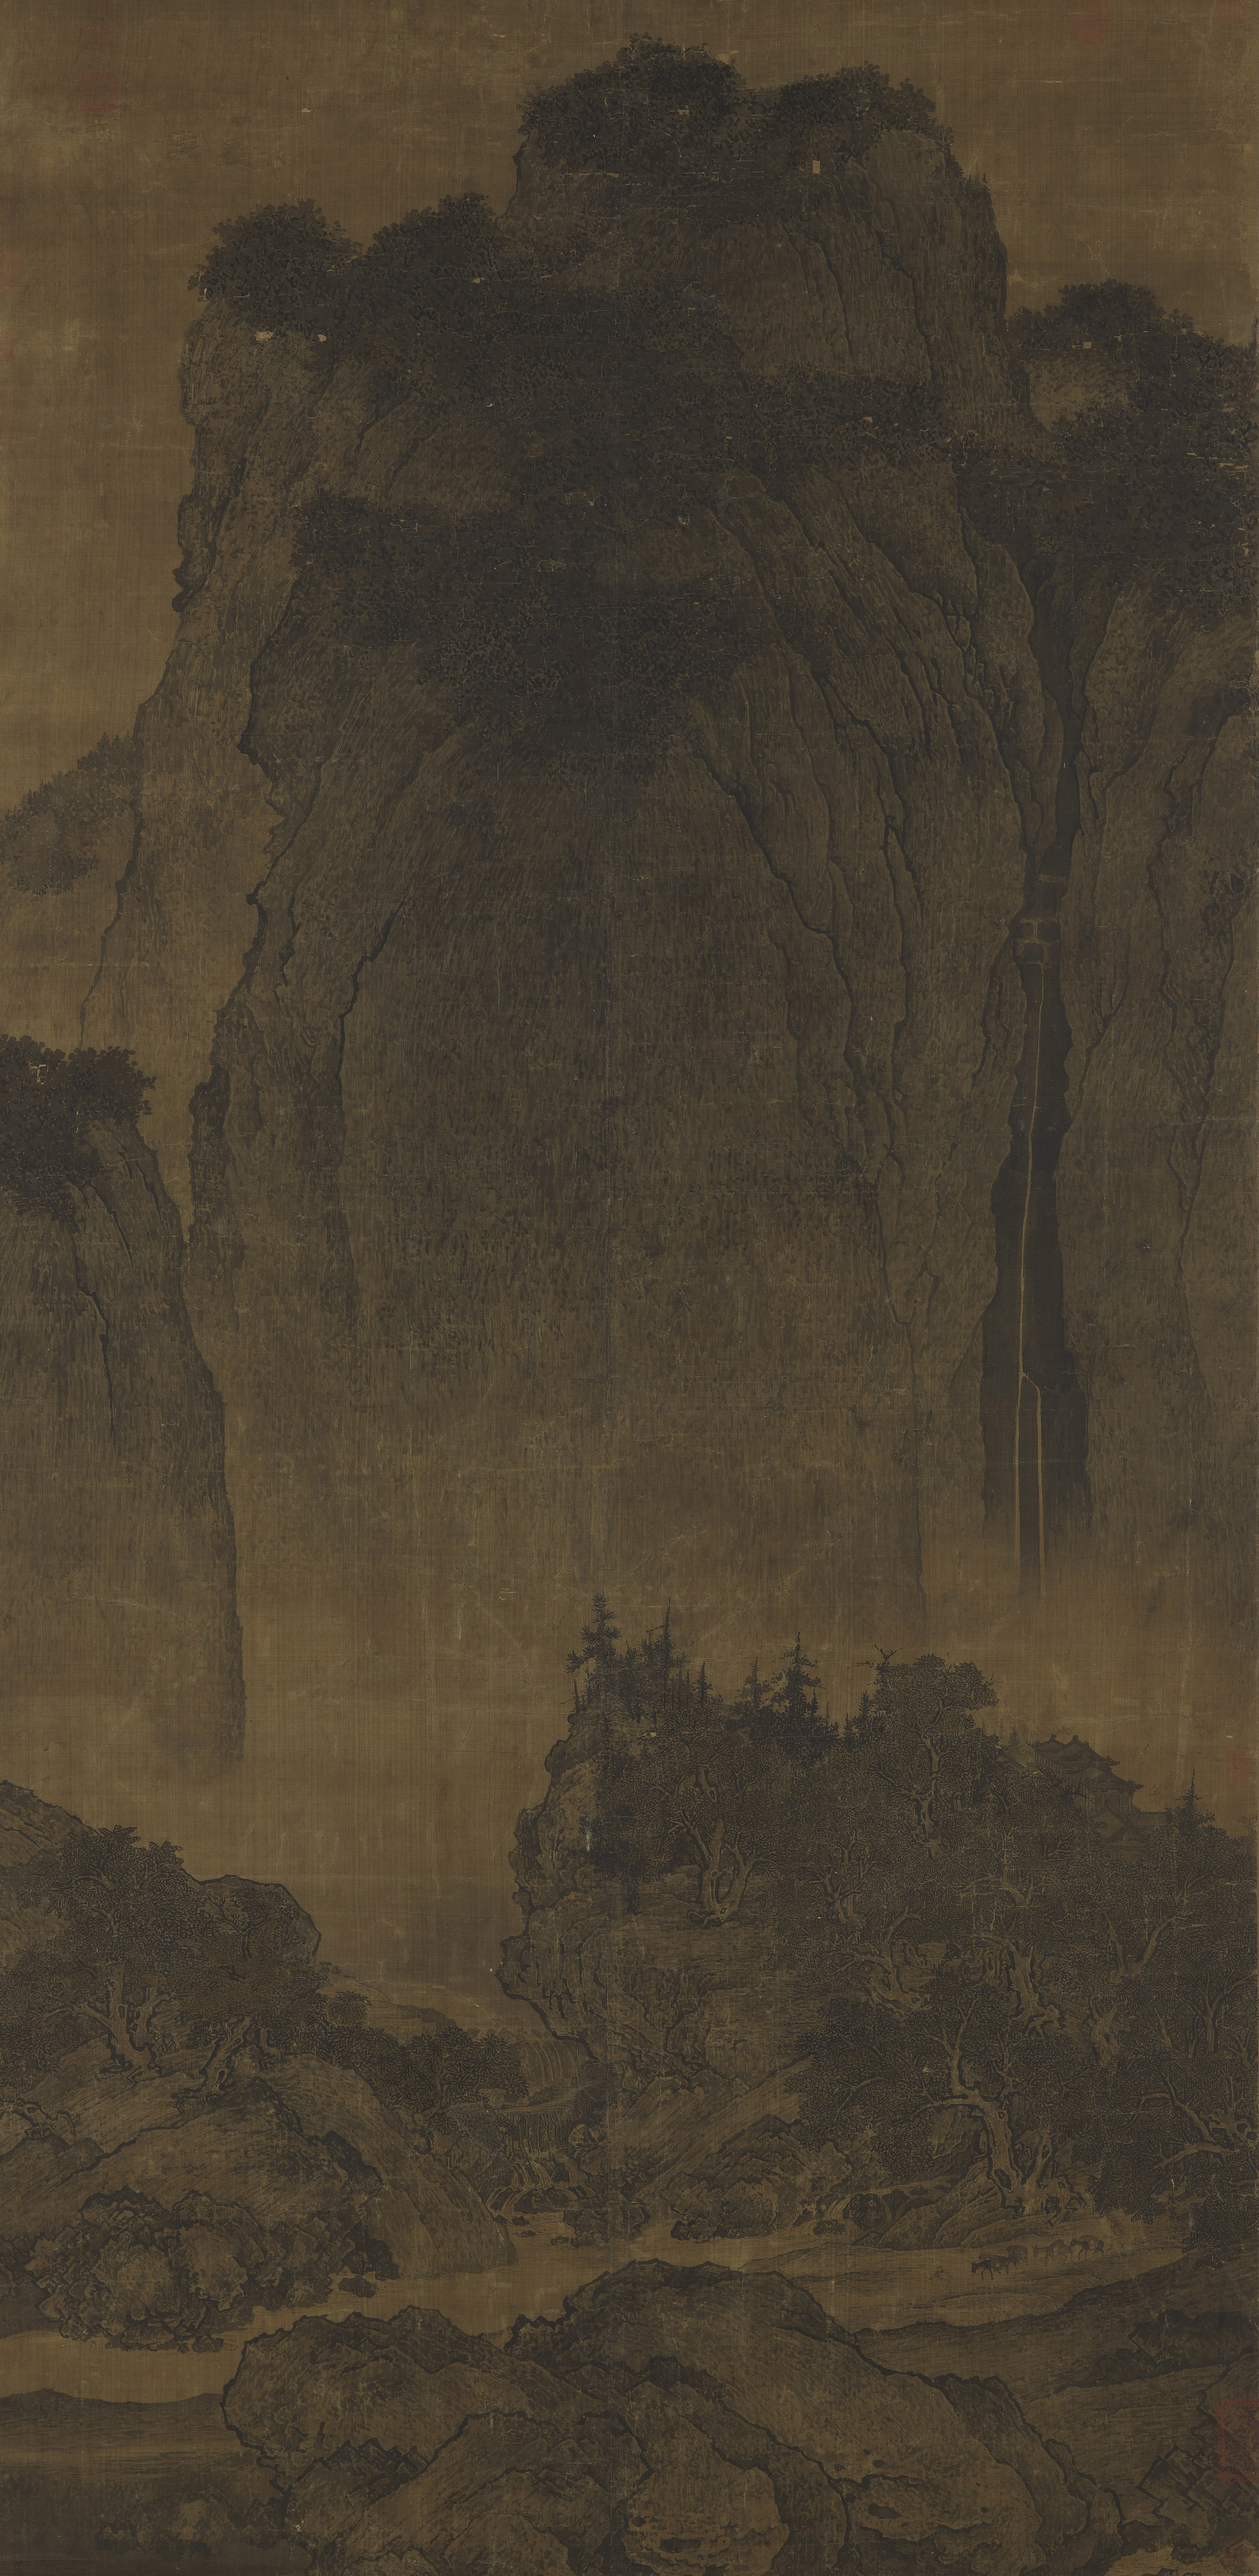 Monumental landscape (detail), Fan Kuan, Travelers by Streams and Mountains, c. 1000, ink on silk hanging scroll, 206.3 x 103.3 cm (National Palace Museum, Taipei)